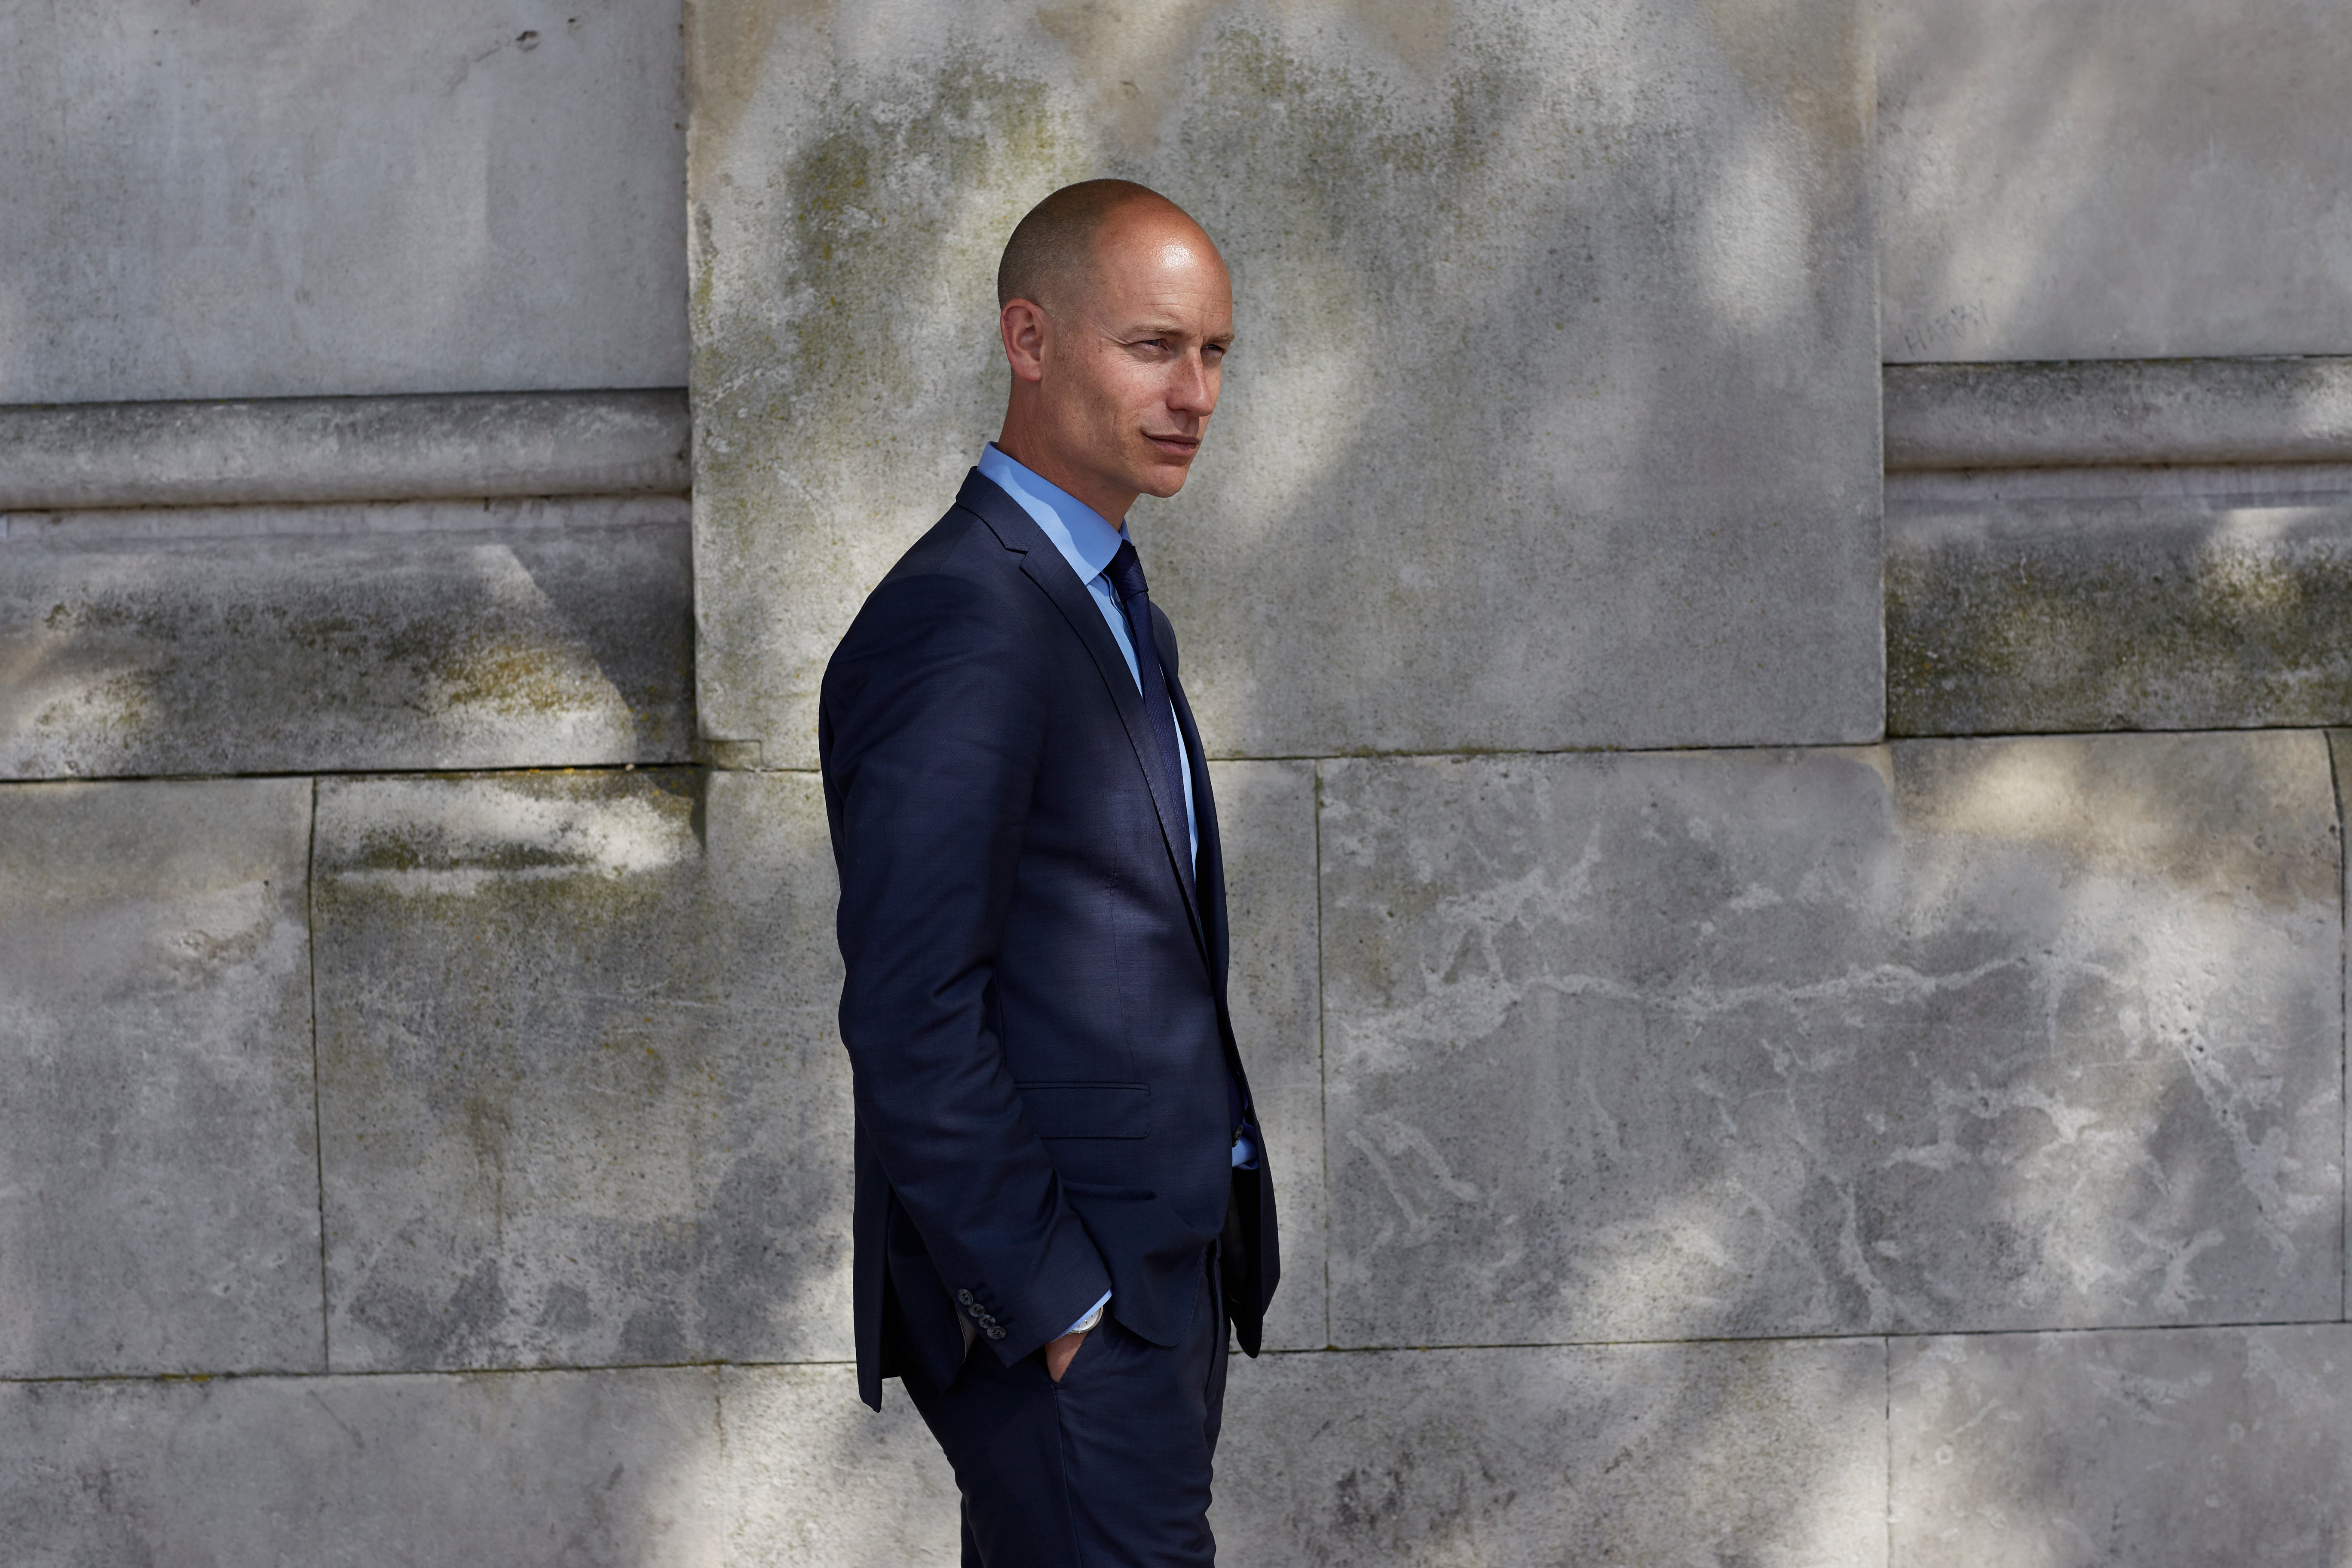 Stephen Kinnock is proving to be a force to be reckoned with